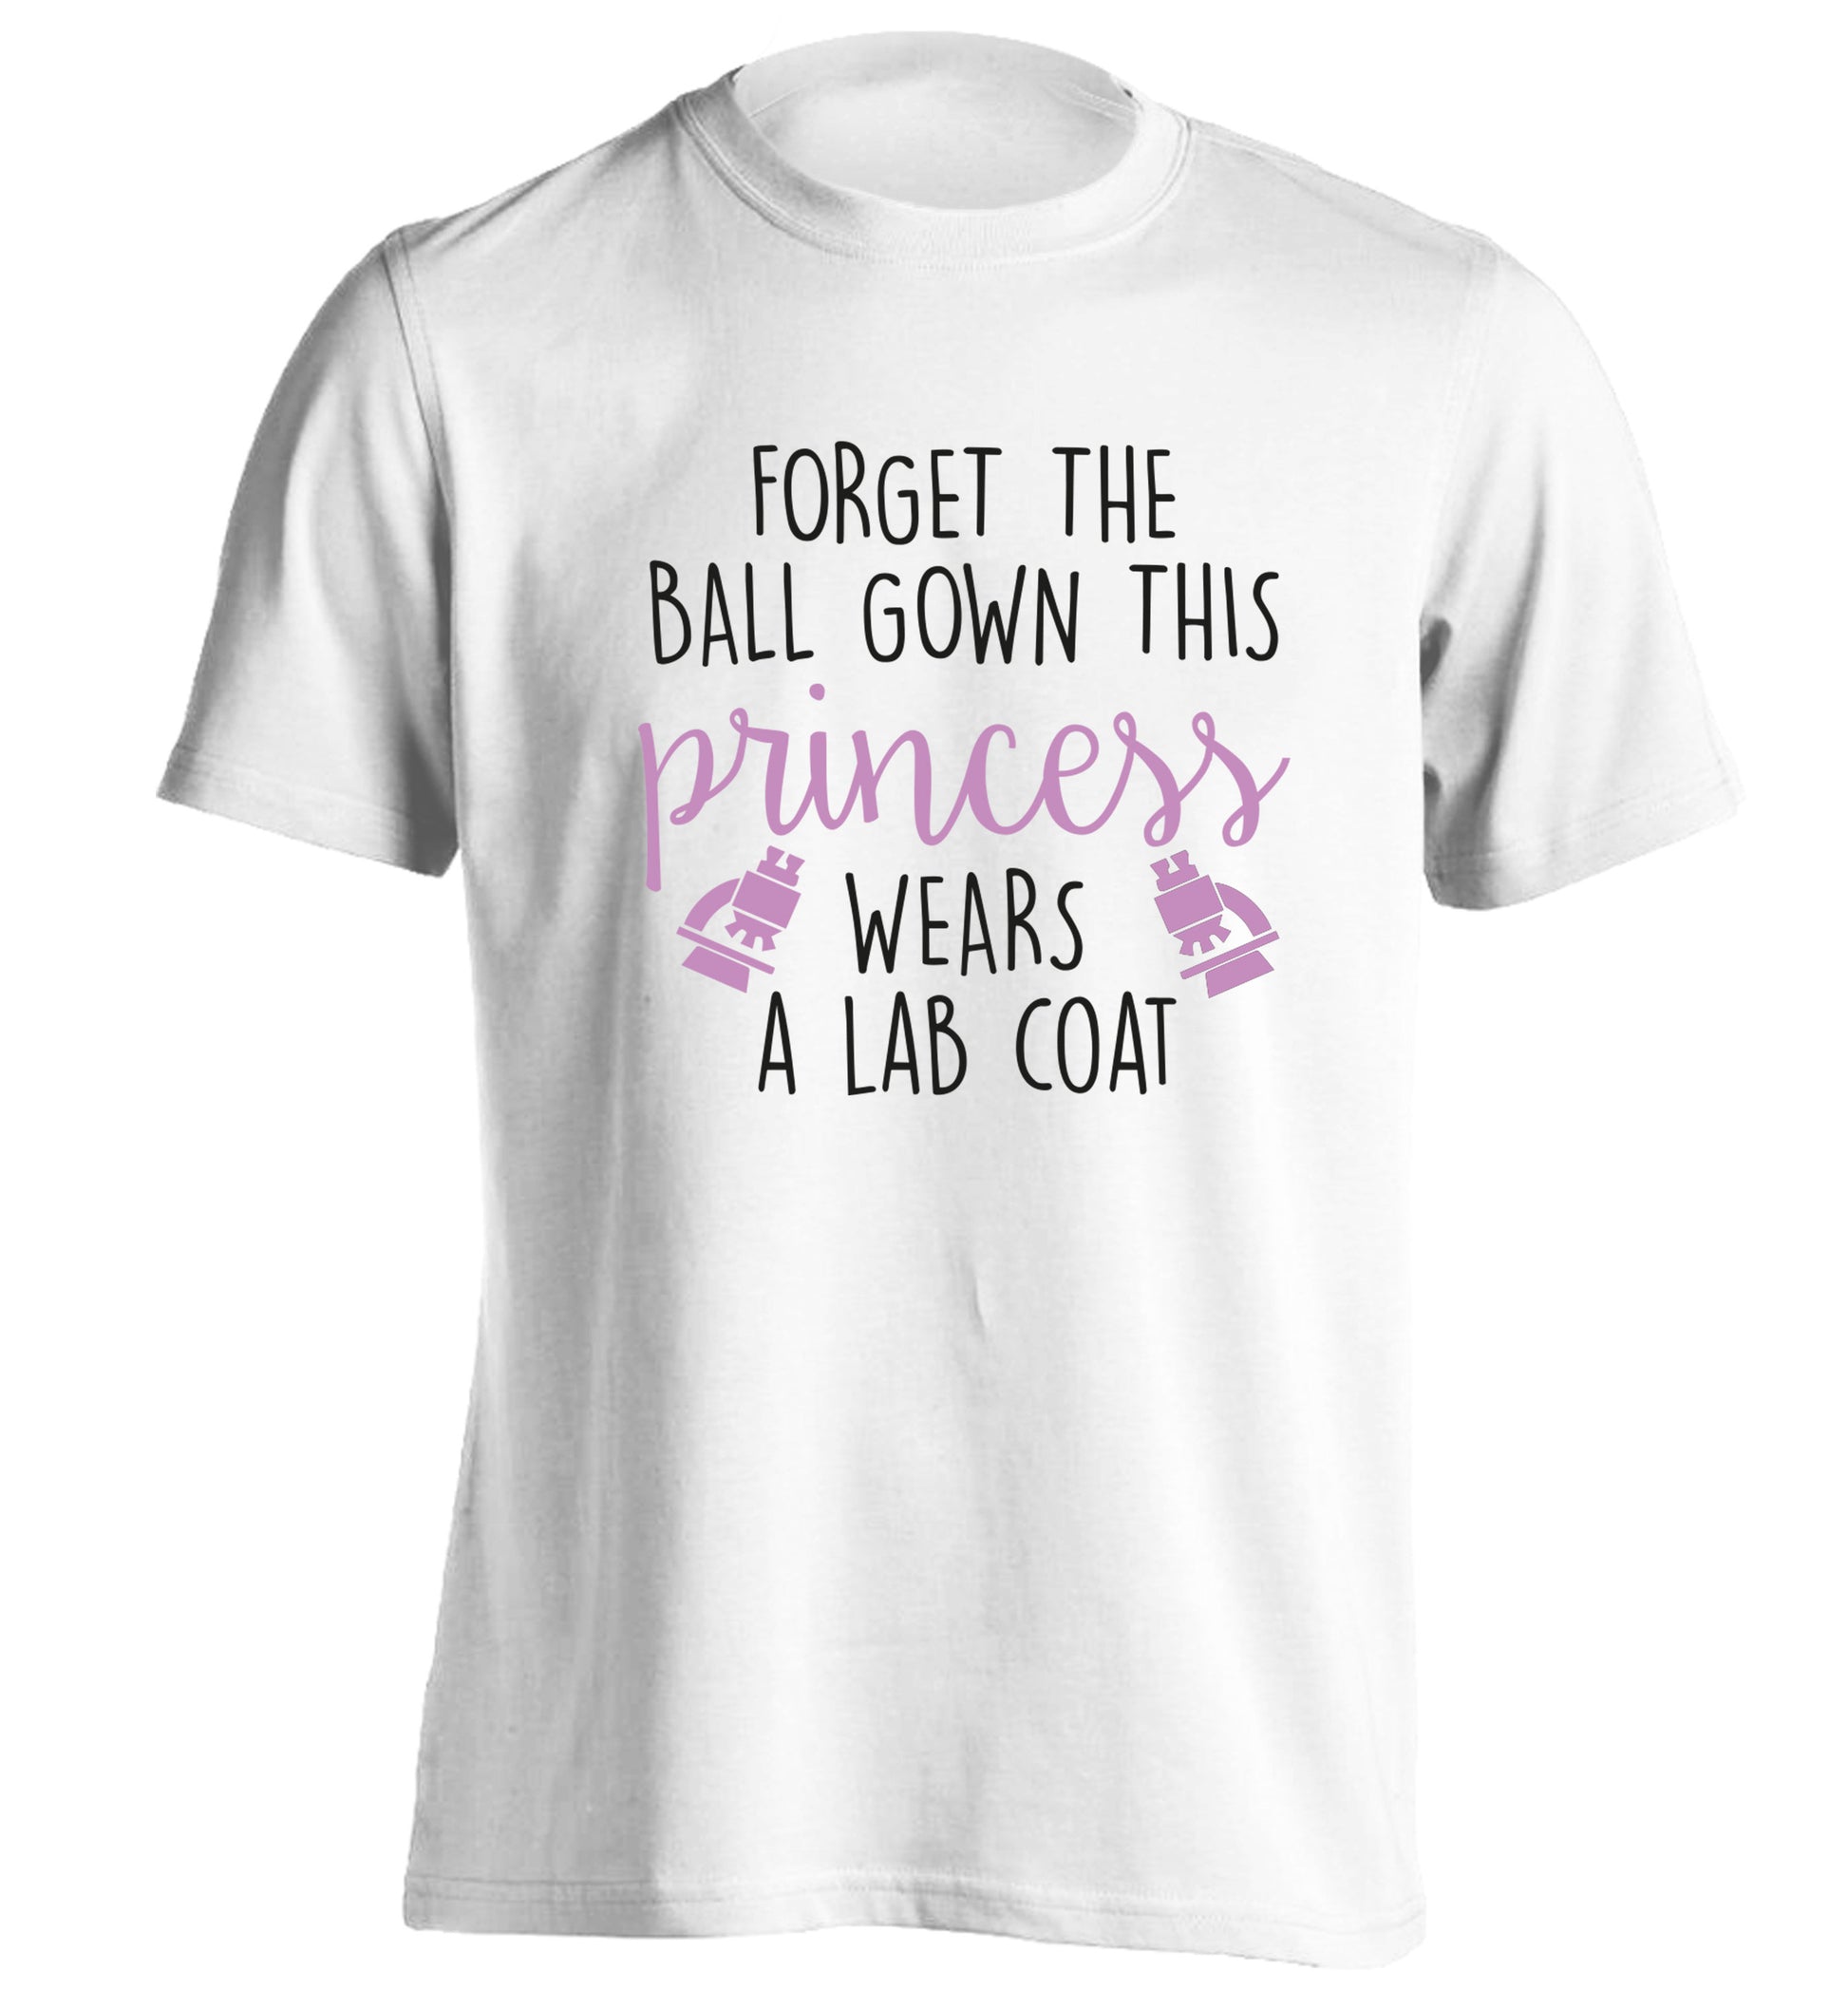 Forget the ball gown this princess wears a lab coat adults unisex white Tshirt 2XL